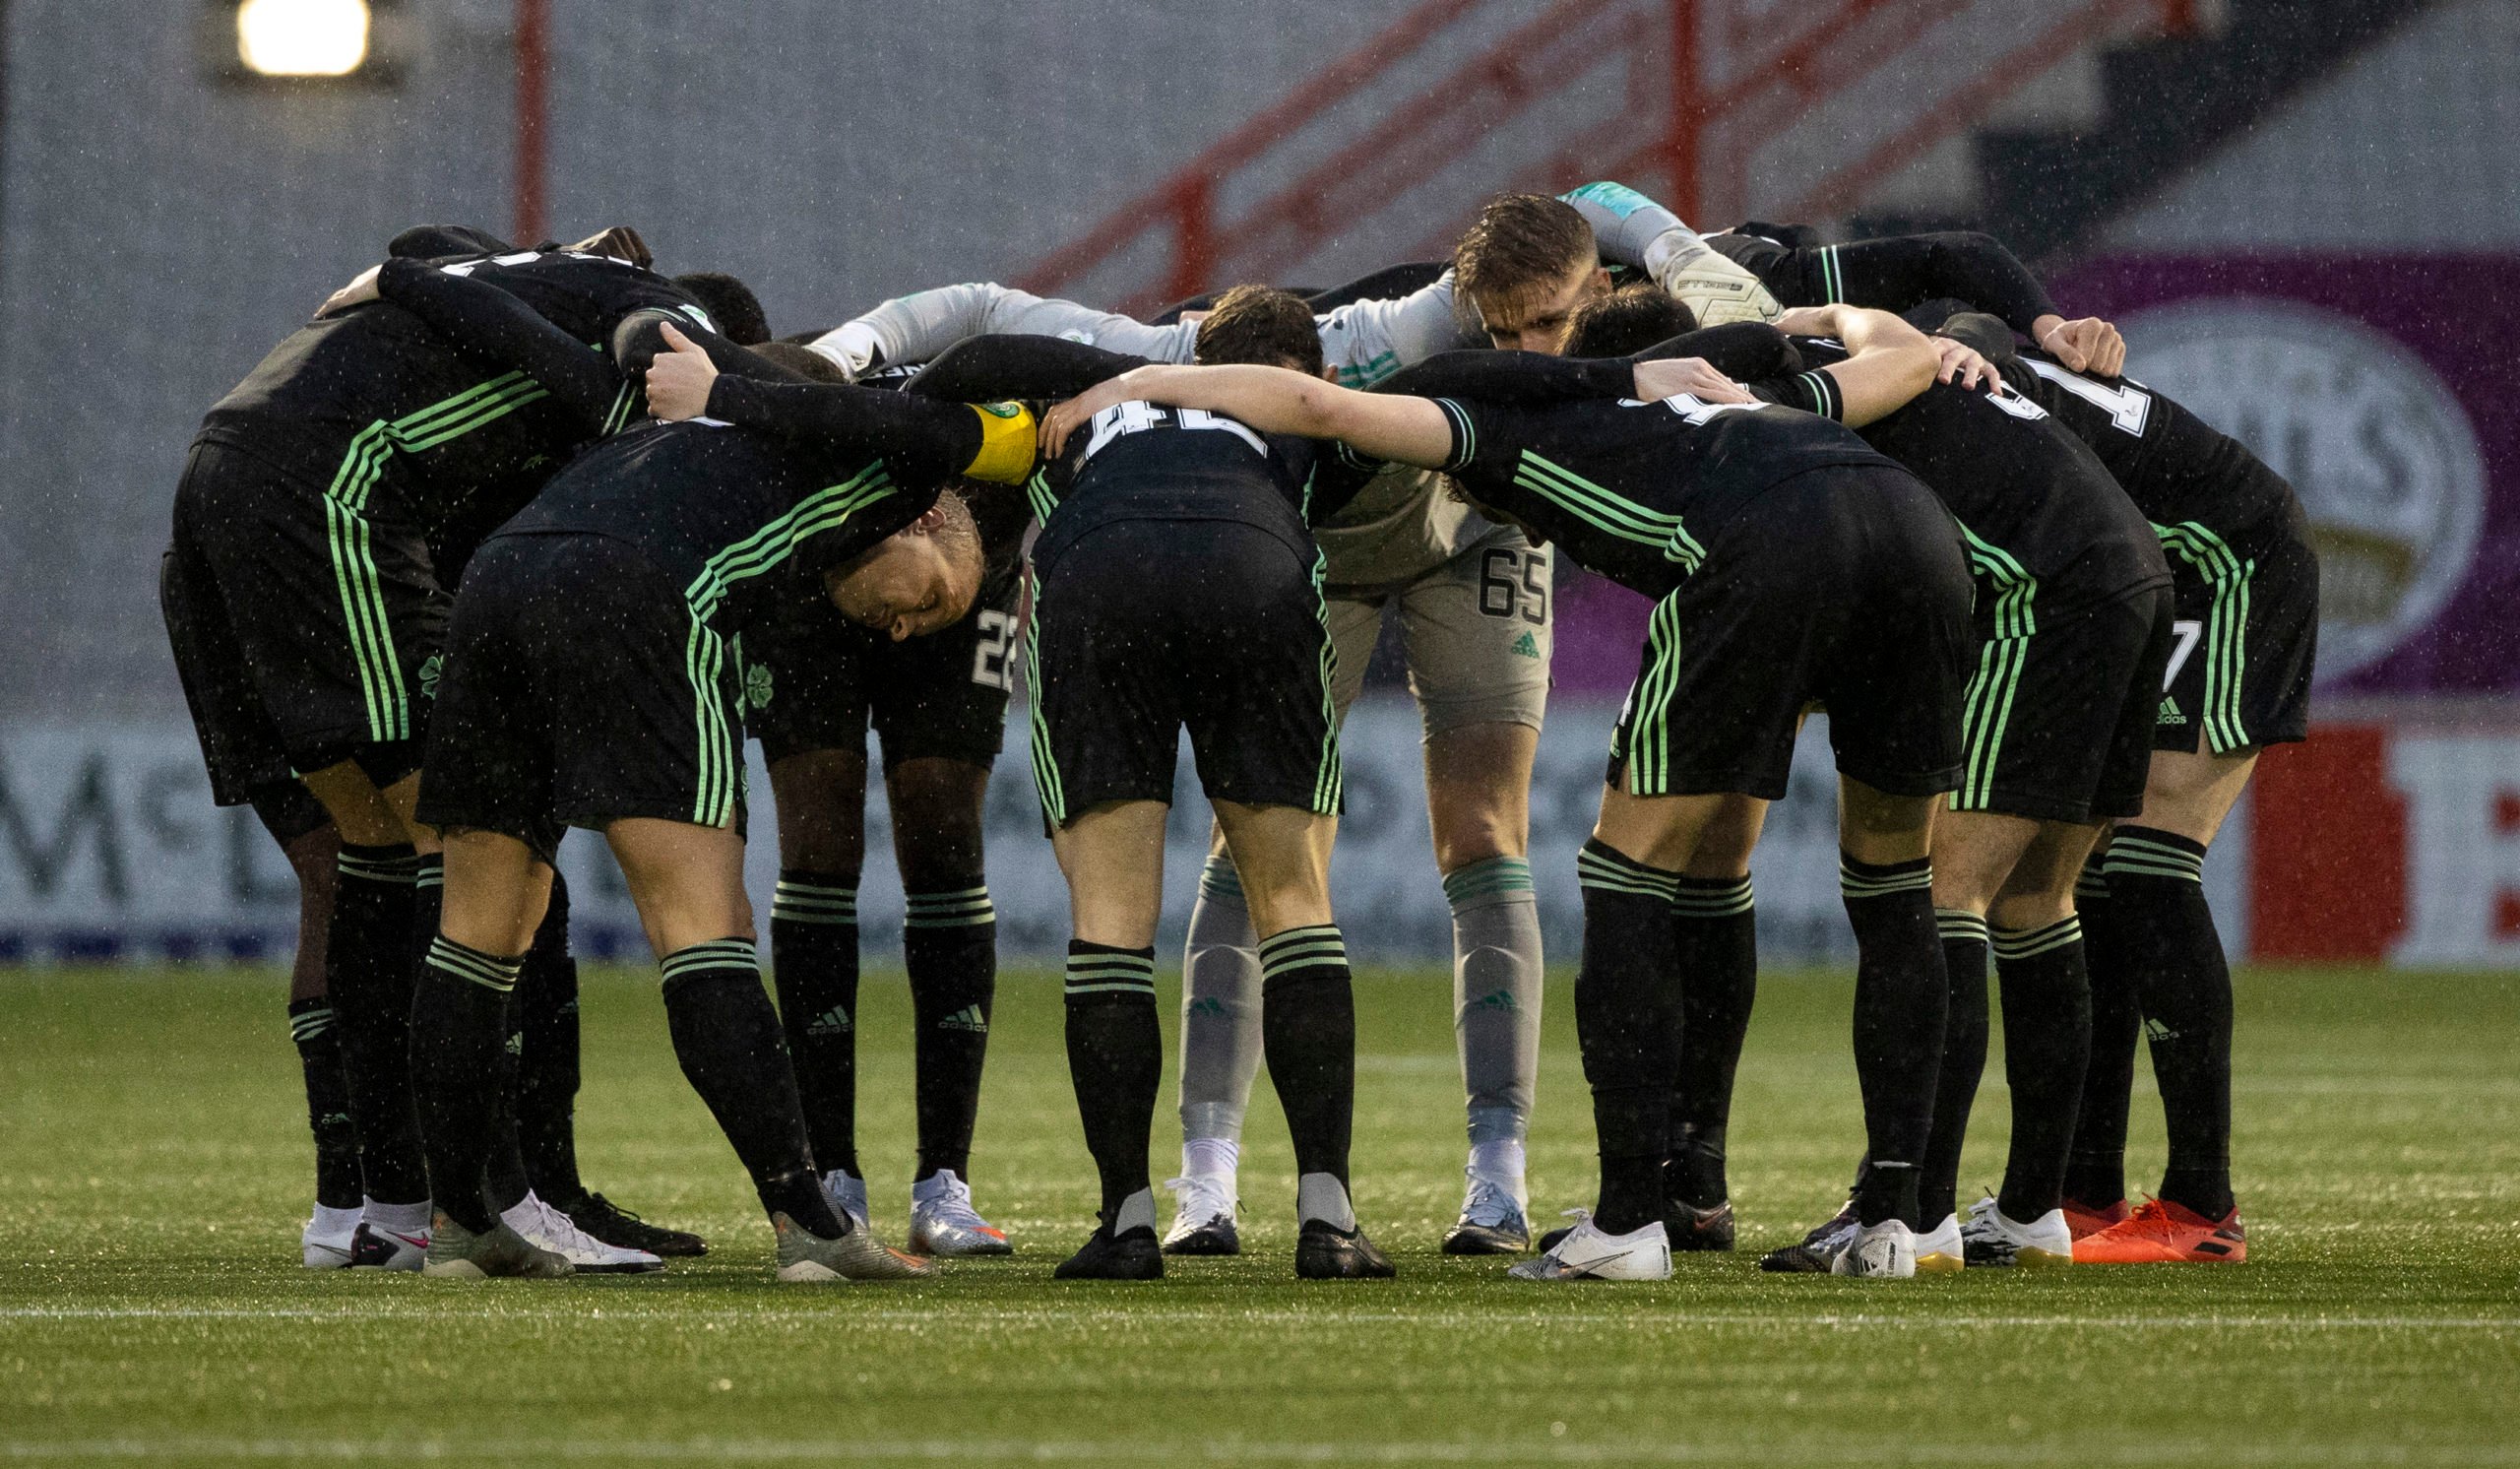 Evaluating the Celtic squad; January is approaching, wholesale change needed?